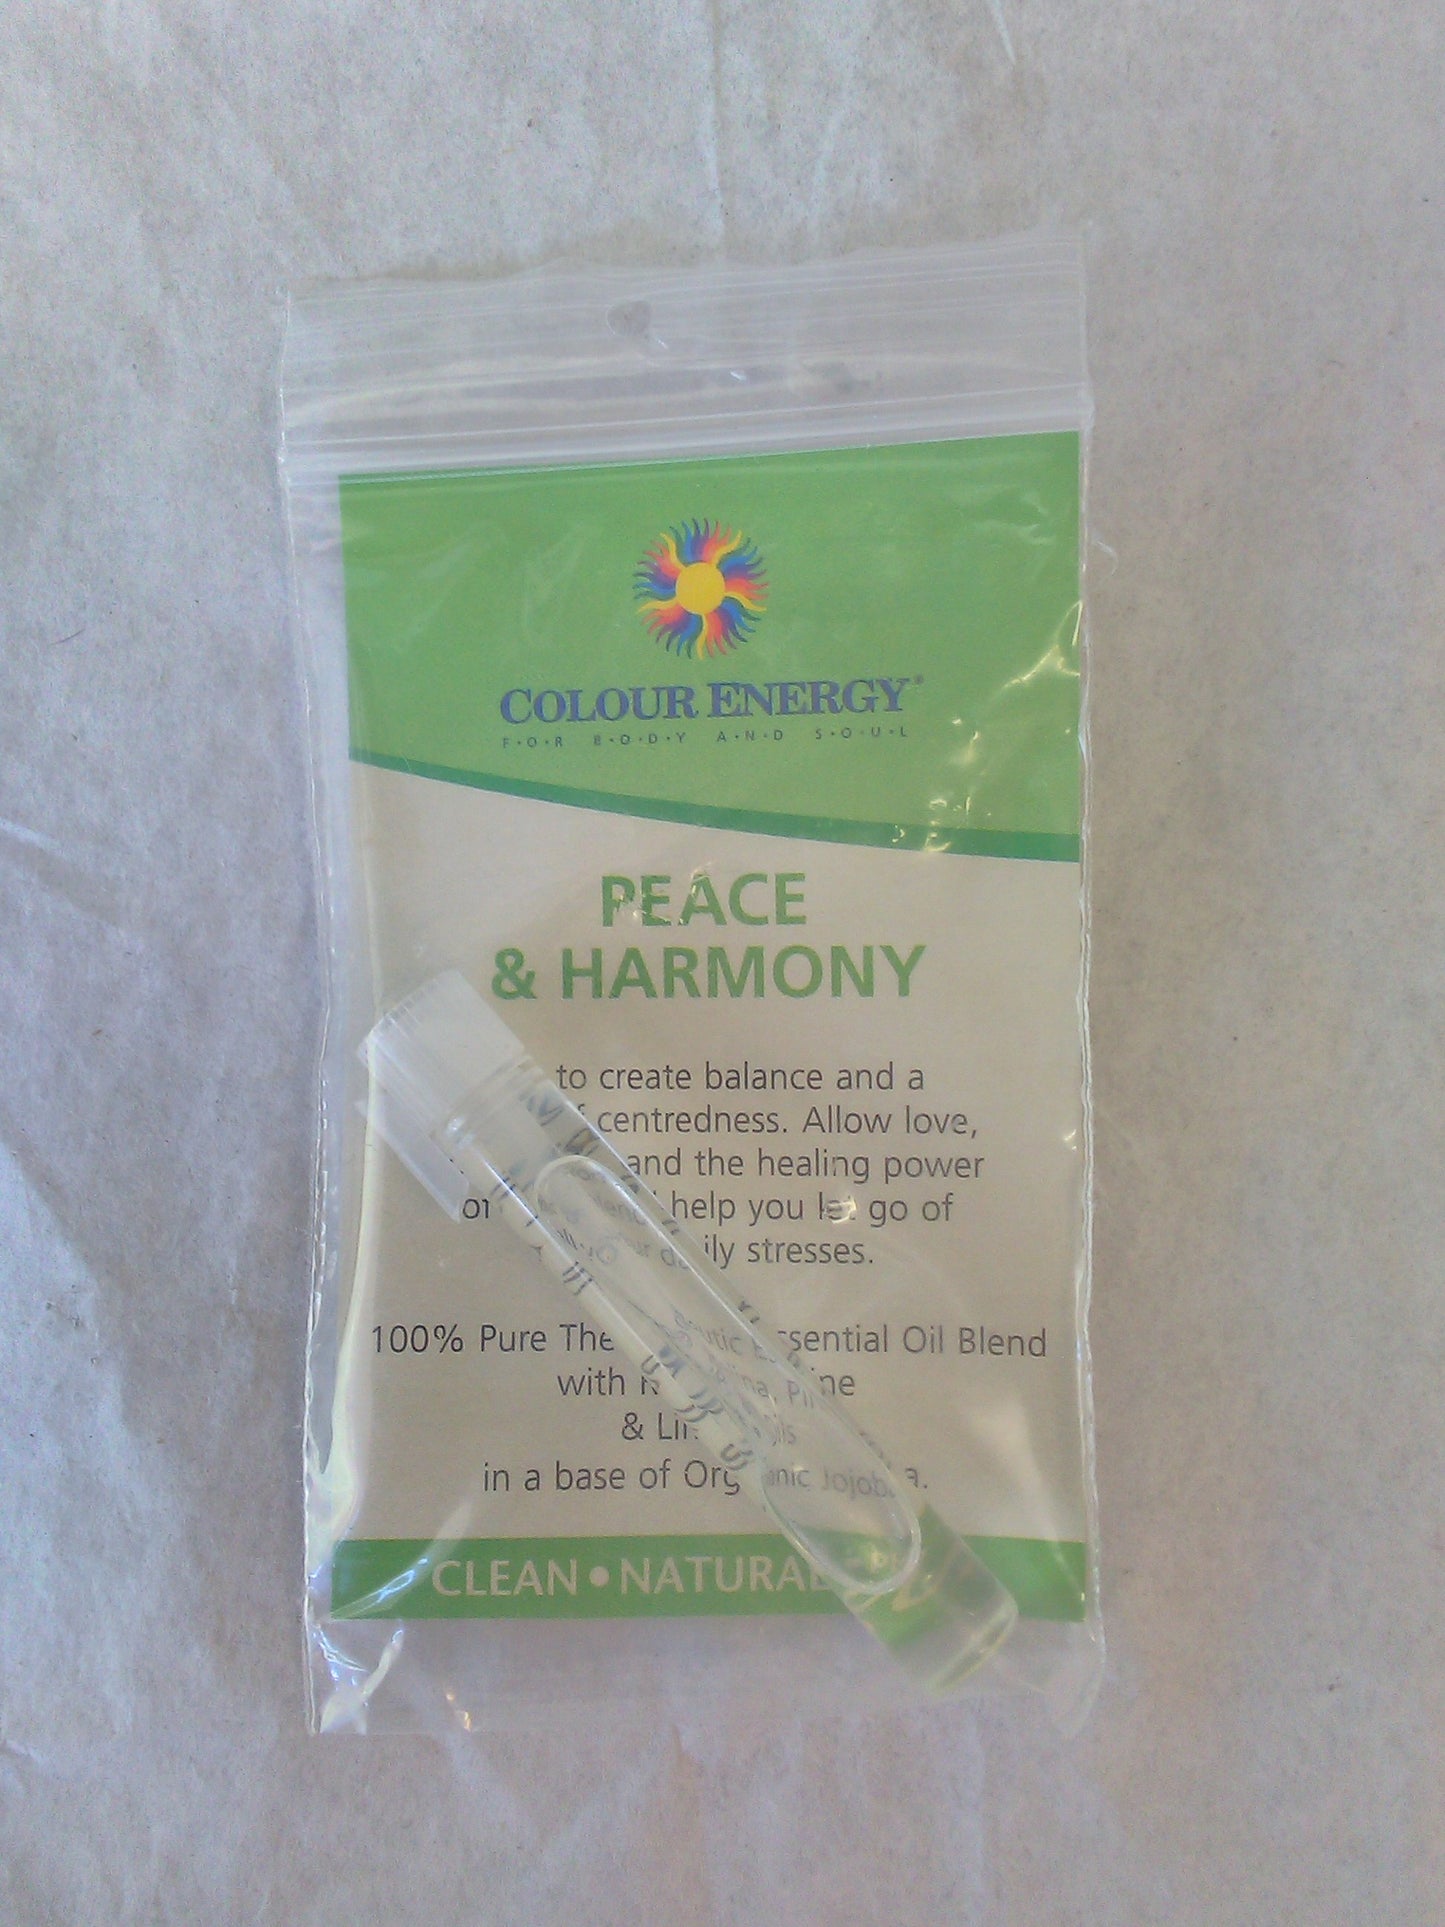 Colour Energy Aromatherapy Blends